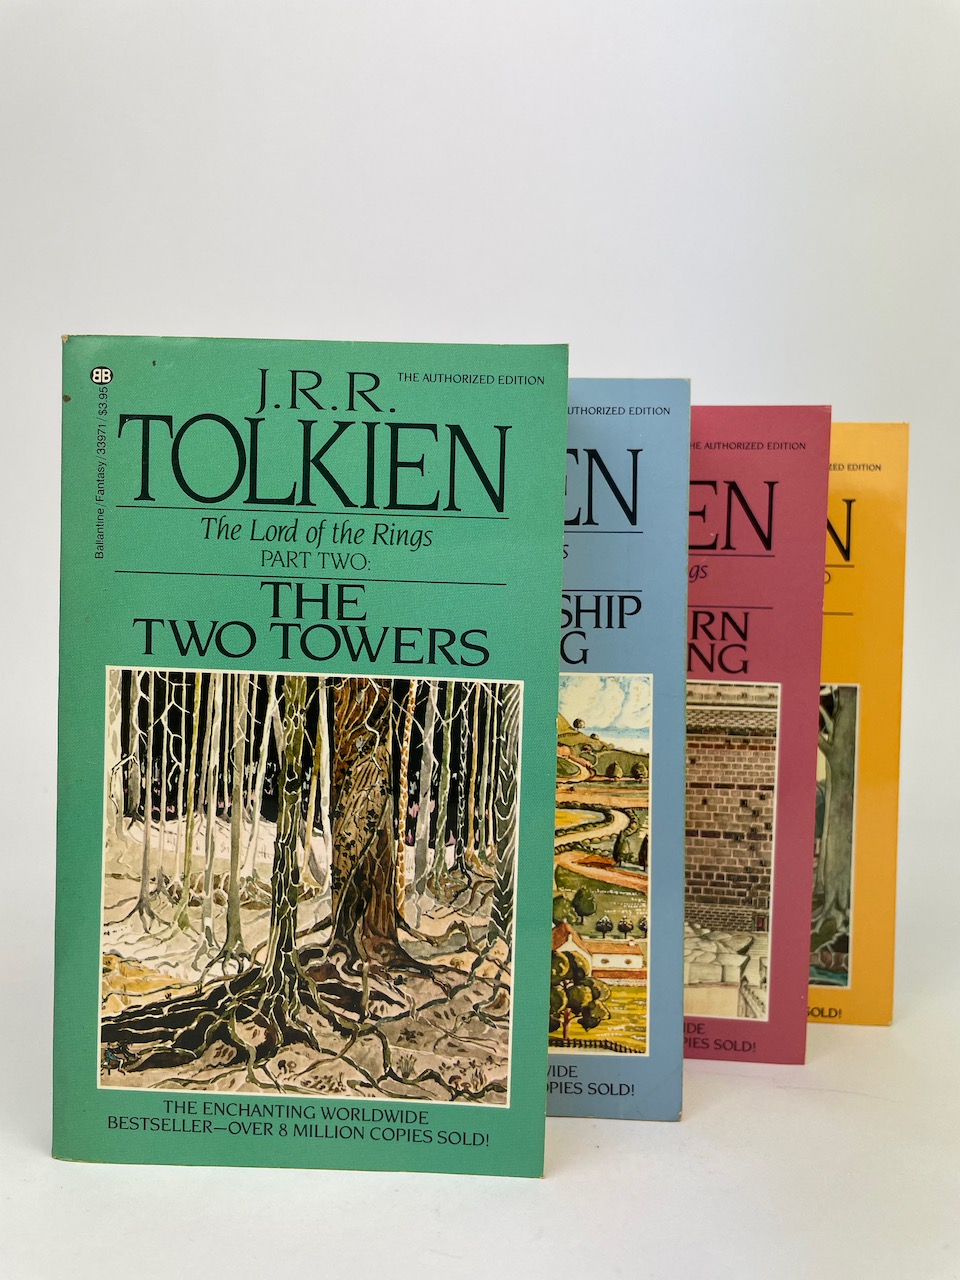 The Hobbit and The Lord of the Rings, Four Paperback Book Boxset from 1986, Blue Slipcase art by J.R.R. Tolkien 17